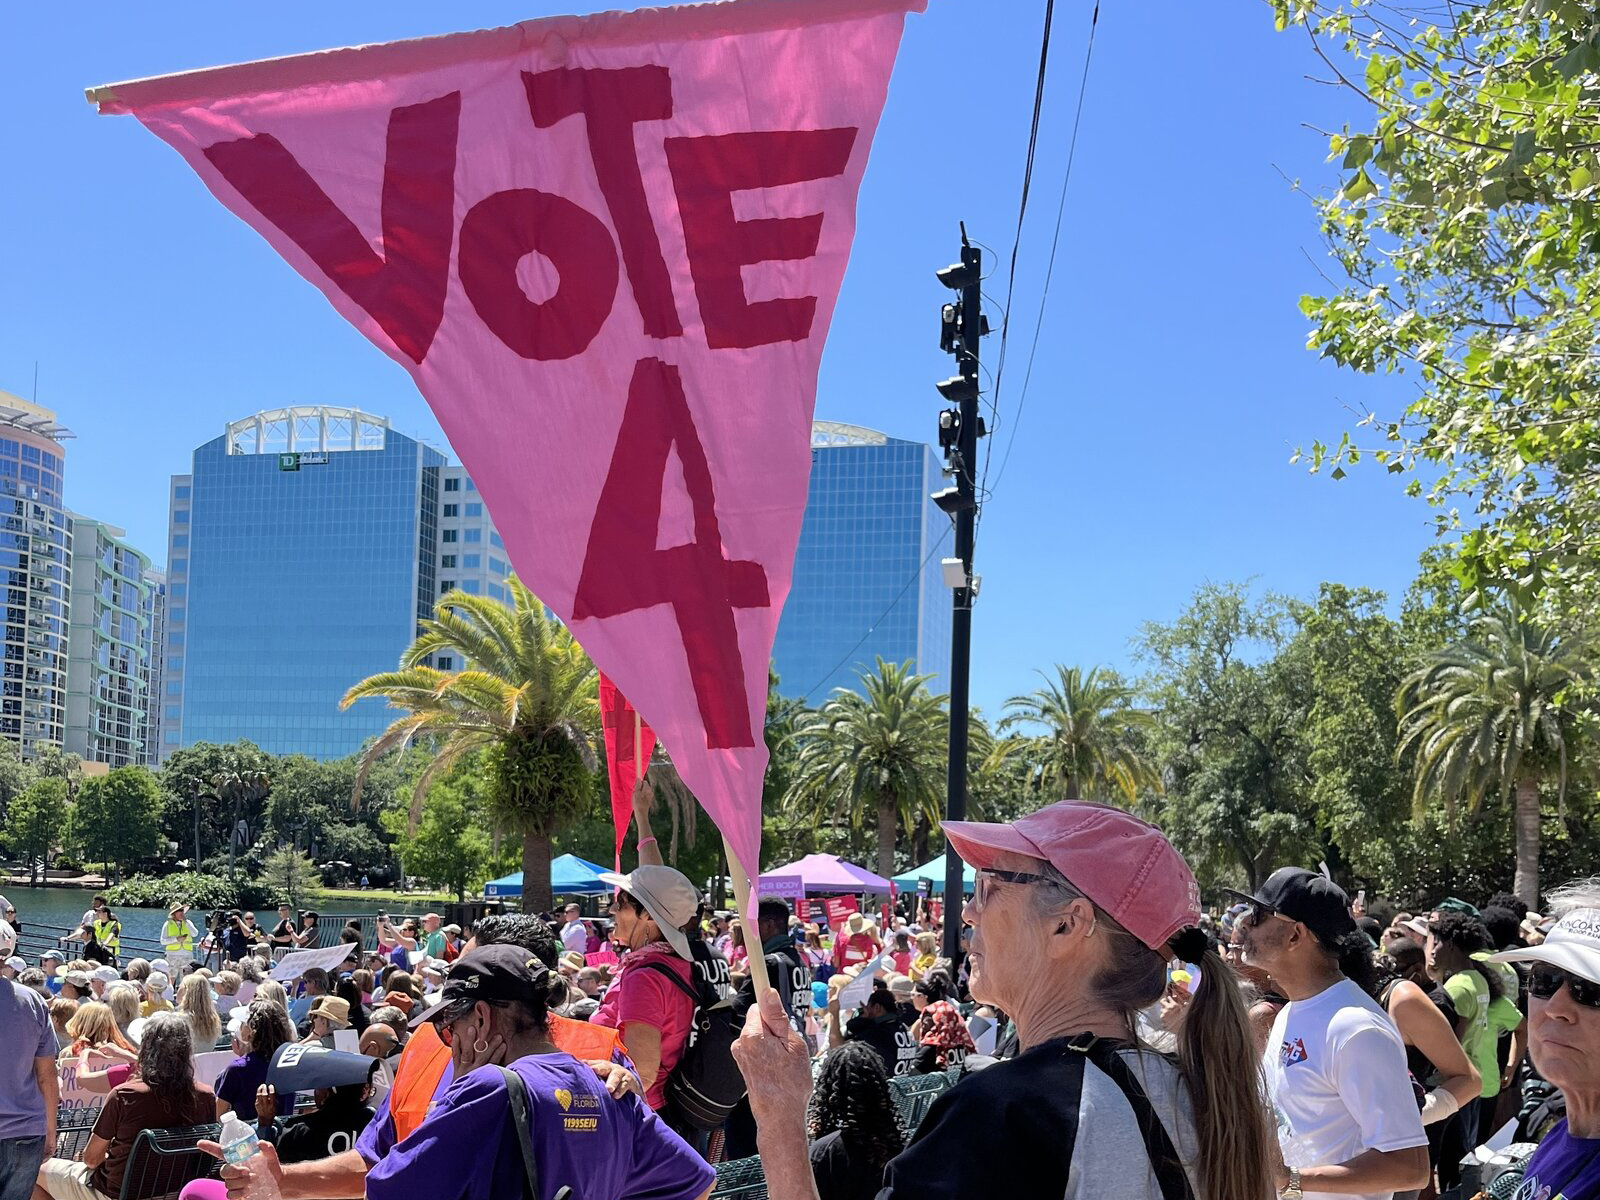 Organizers say that more than 1,000 people were in attendance at a rally for abortion rights in Orlando, Fla. on Saturday, April 13.